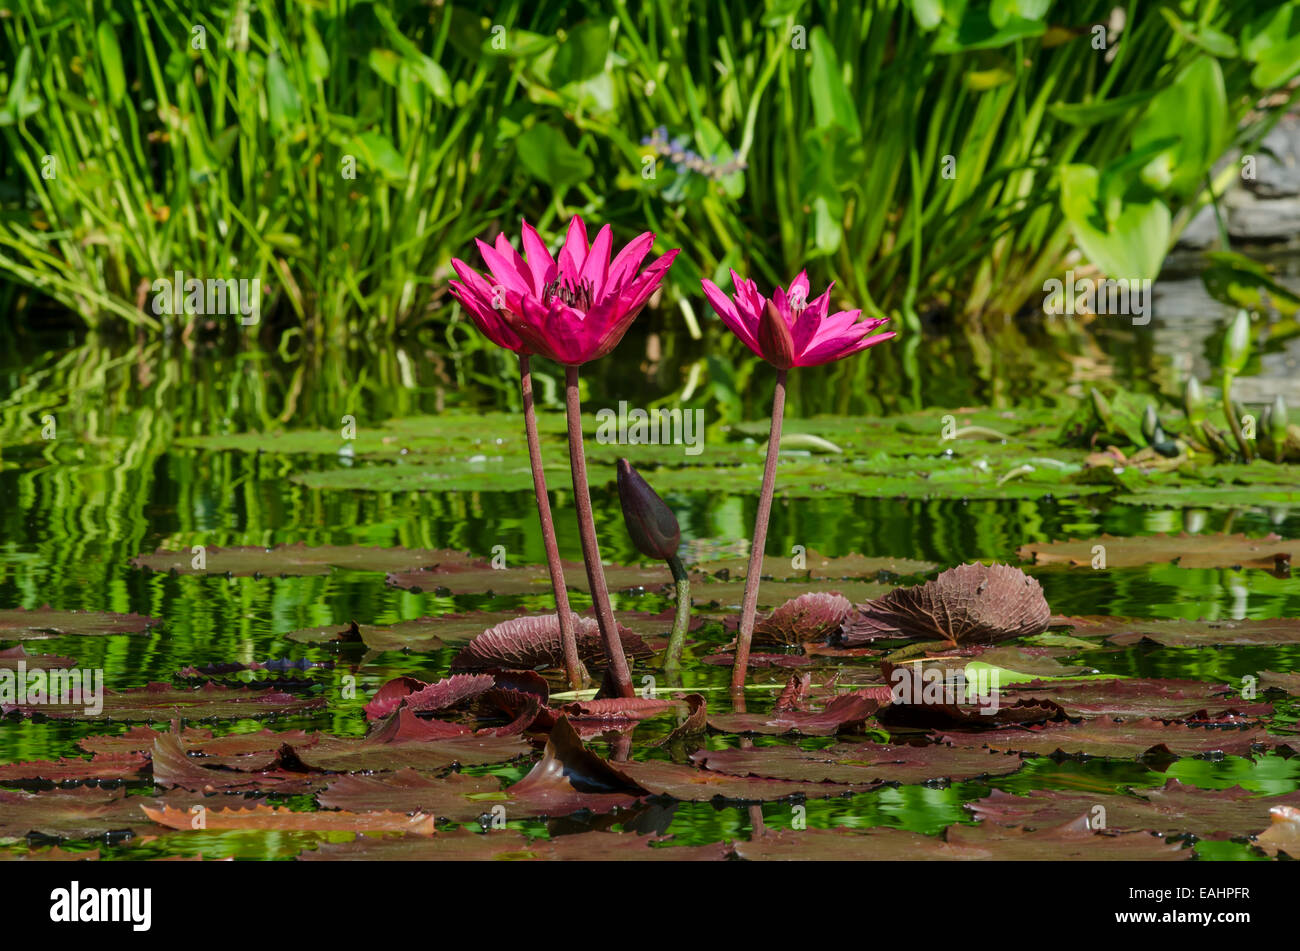 Bright pink flowers bloom out of lily pads in a garden pond Stock Photo